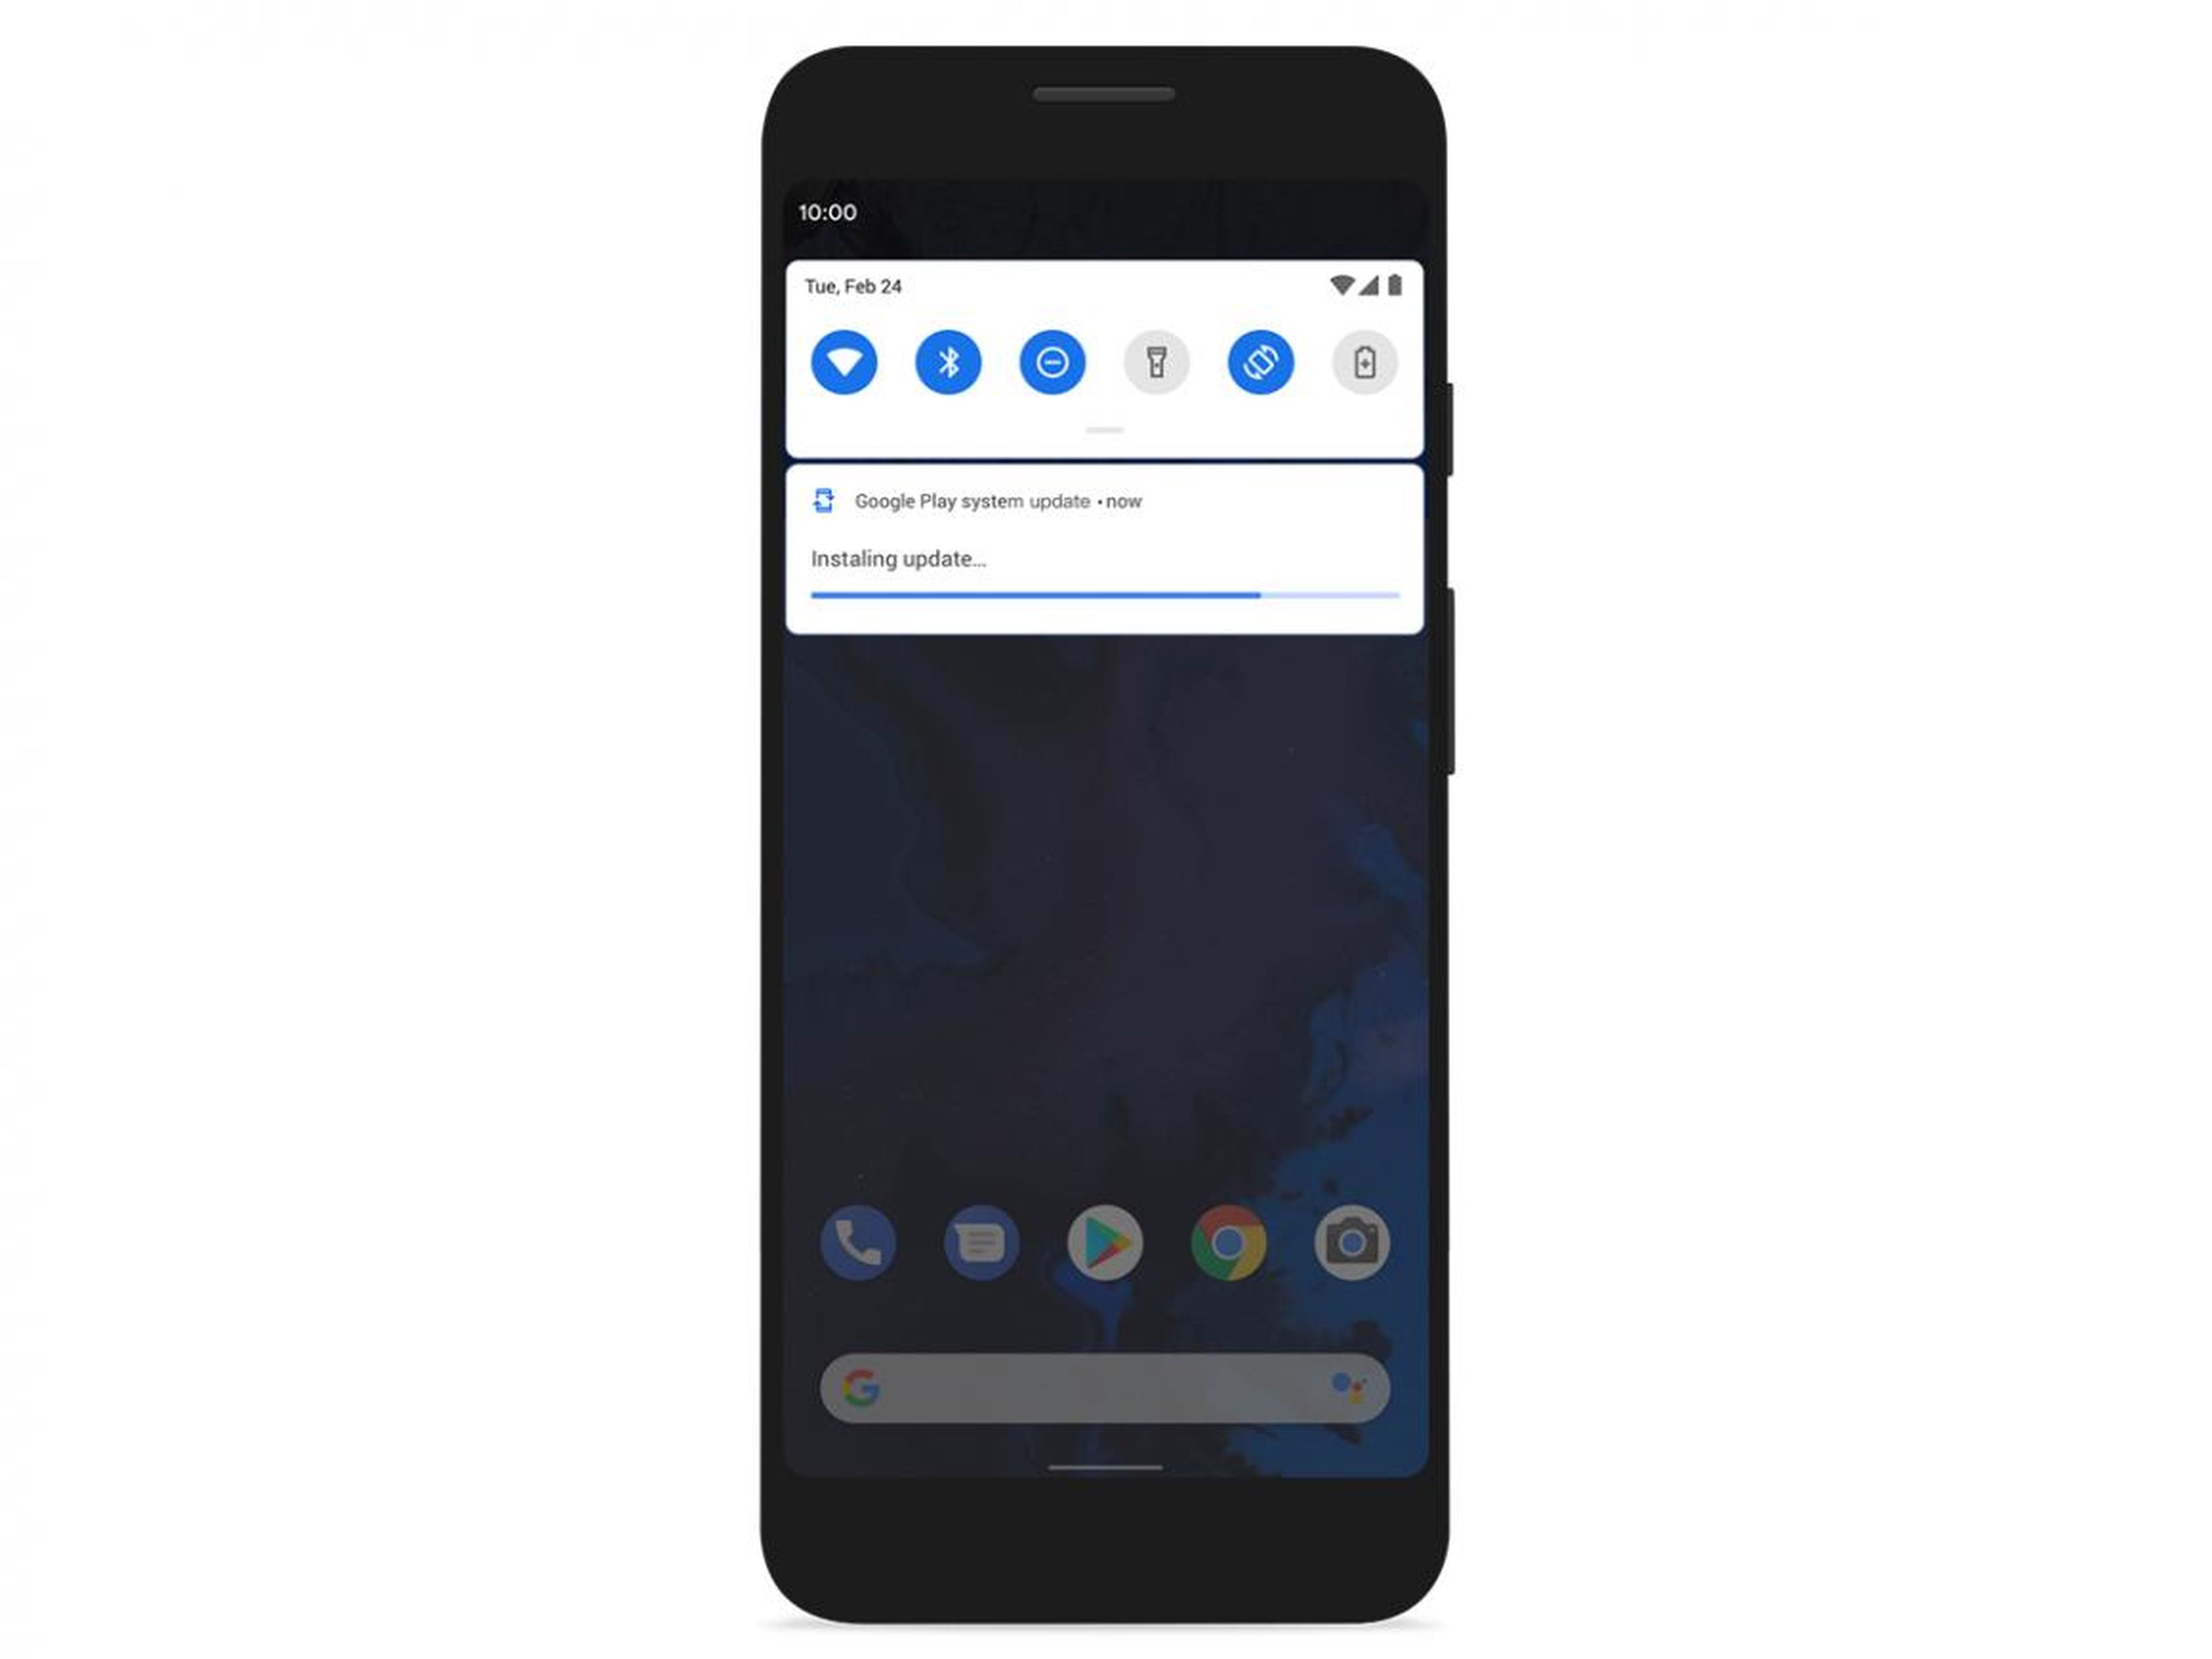 3. Android 10 phones will receive security updates like an app update in the Google Play store, making it faster and easier for people to get the latest security updates.